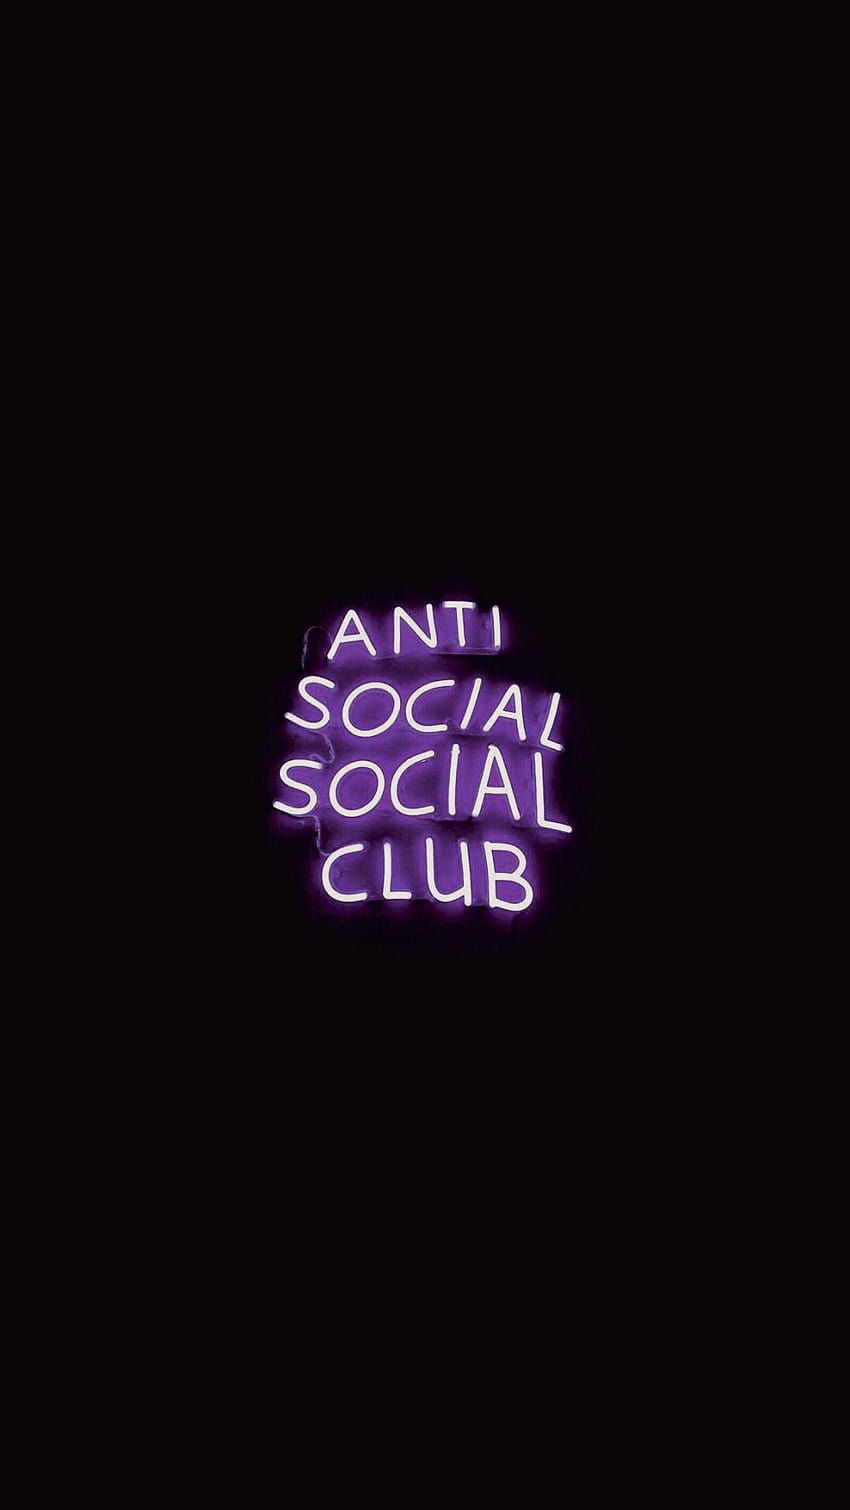 Antisocial Club IPhone Wallpaper  IPhone Wallpapers  iPhone Wallpapers